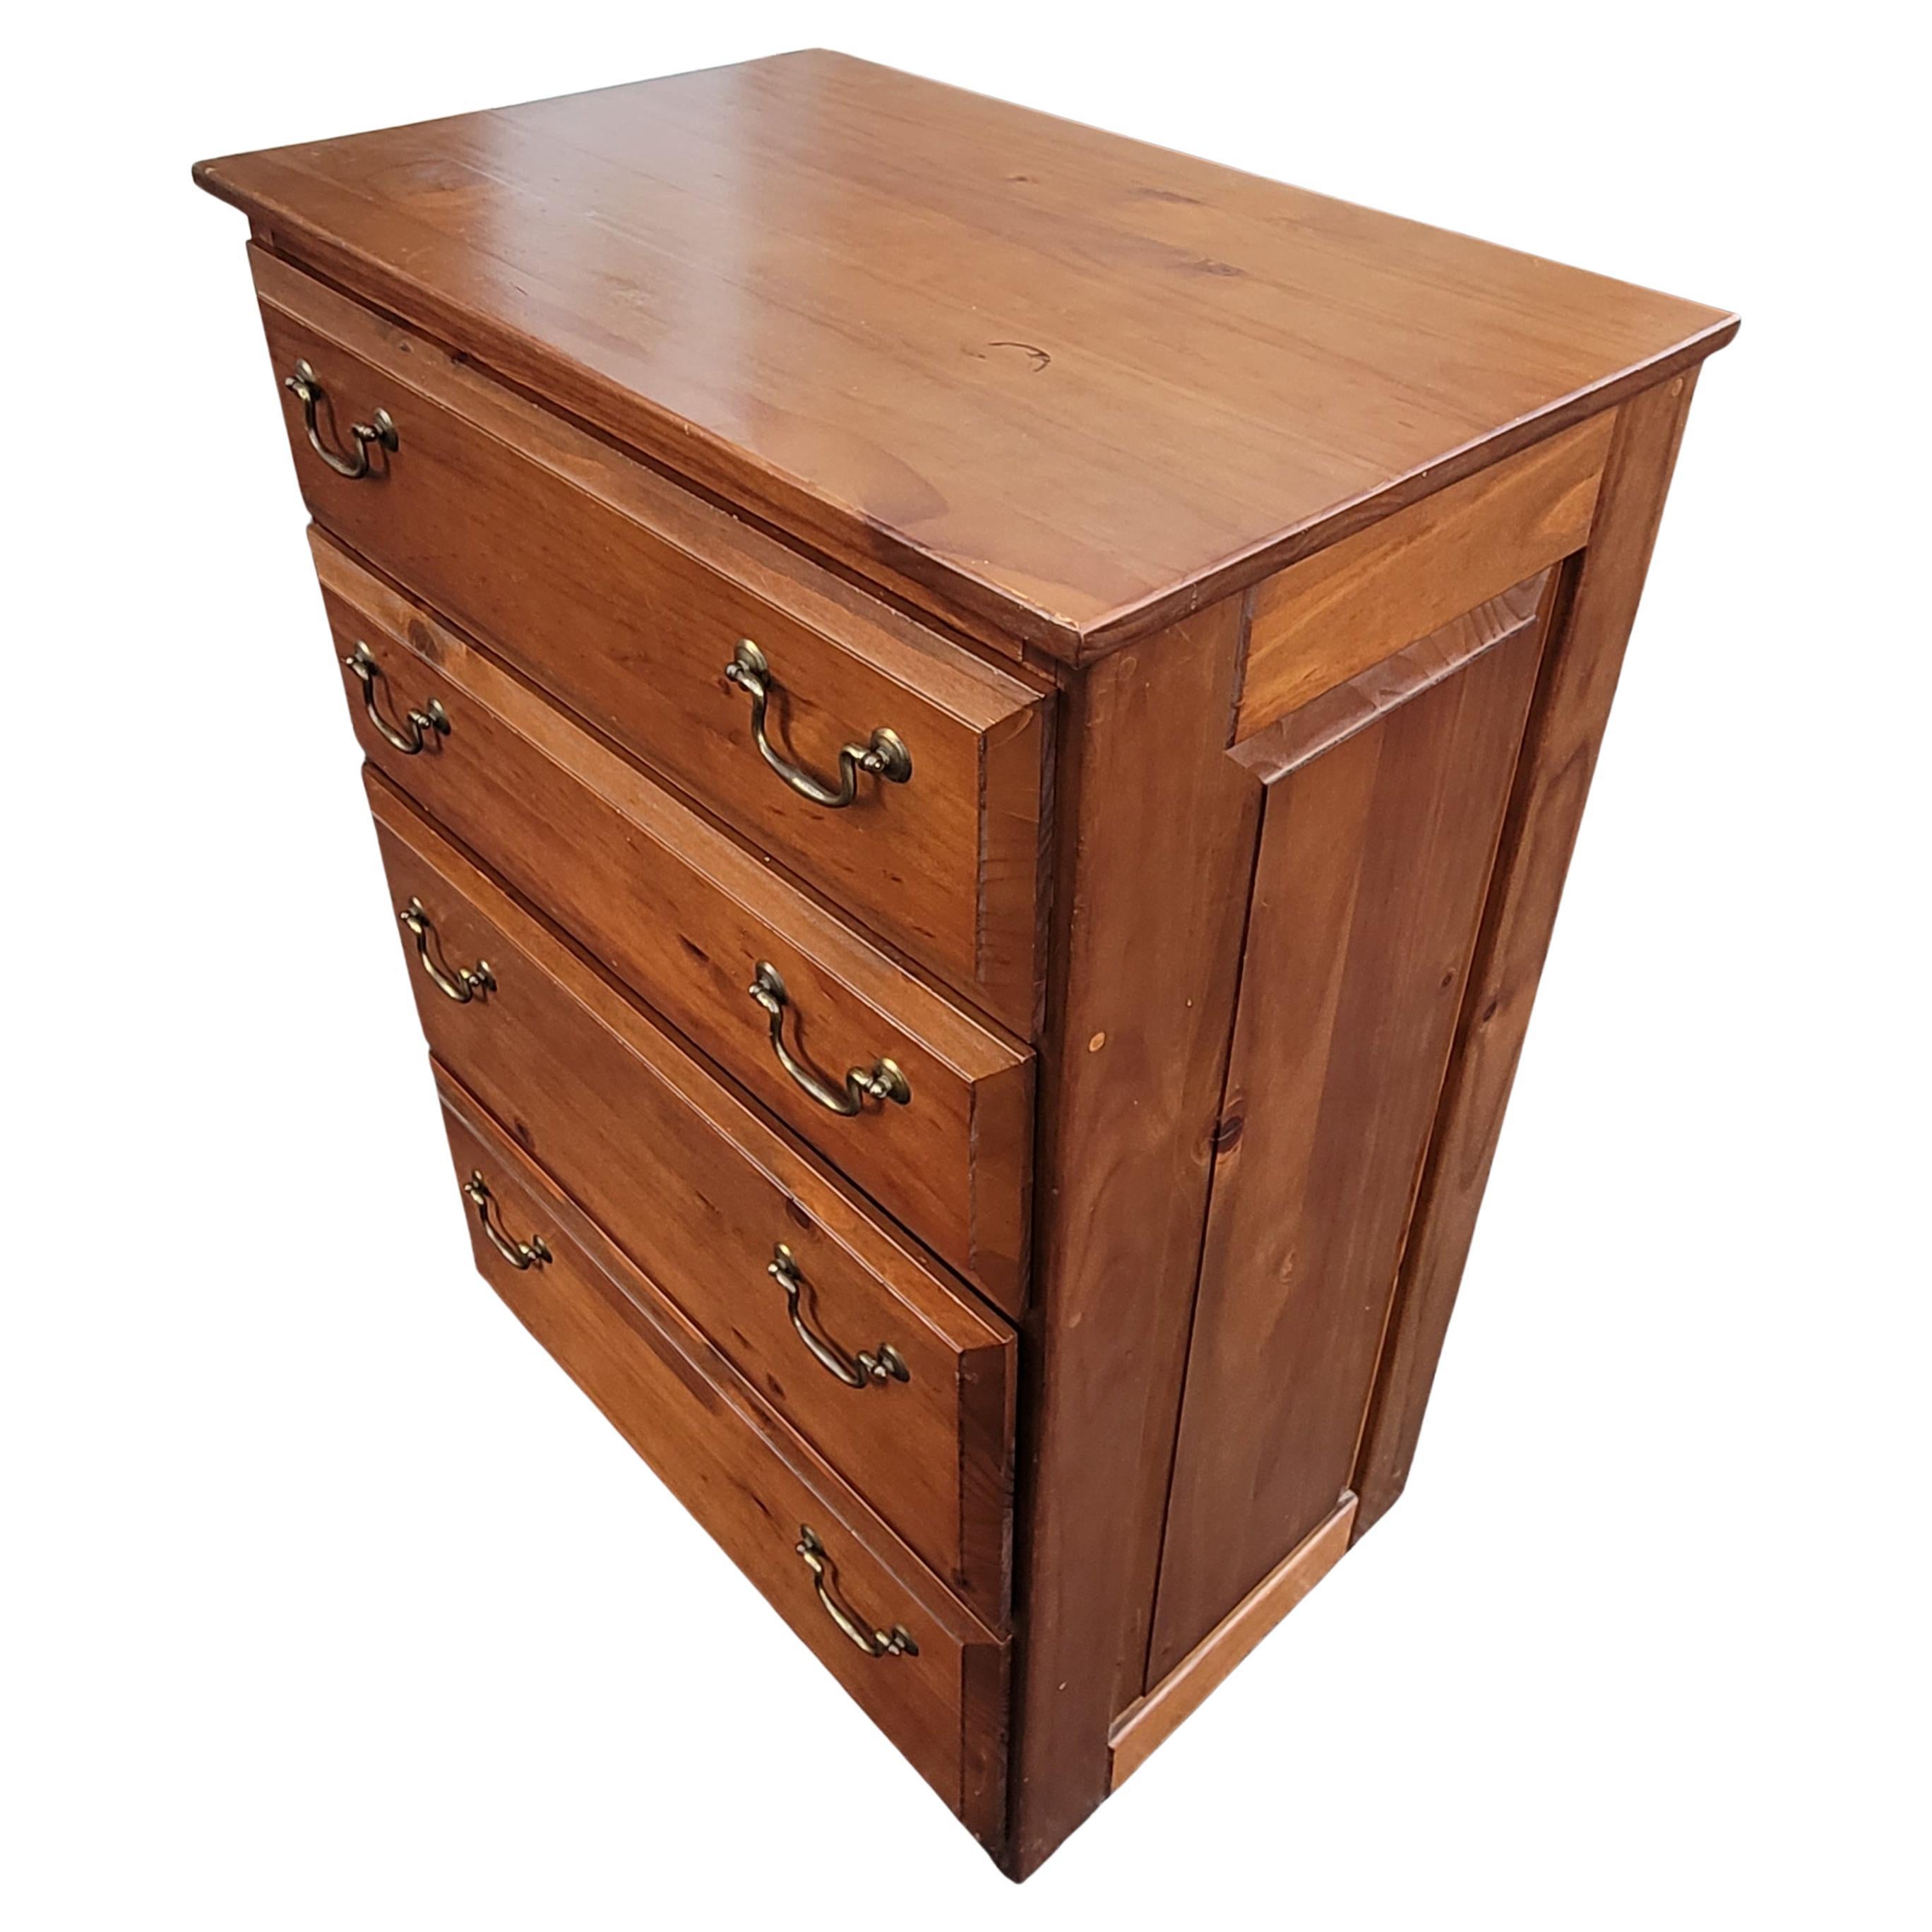 American Classical Solid Pine with Panelized Sides Chest of Drawers In Good Condition For Sale In Germantown, MD